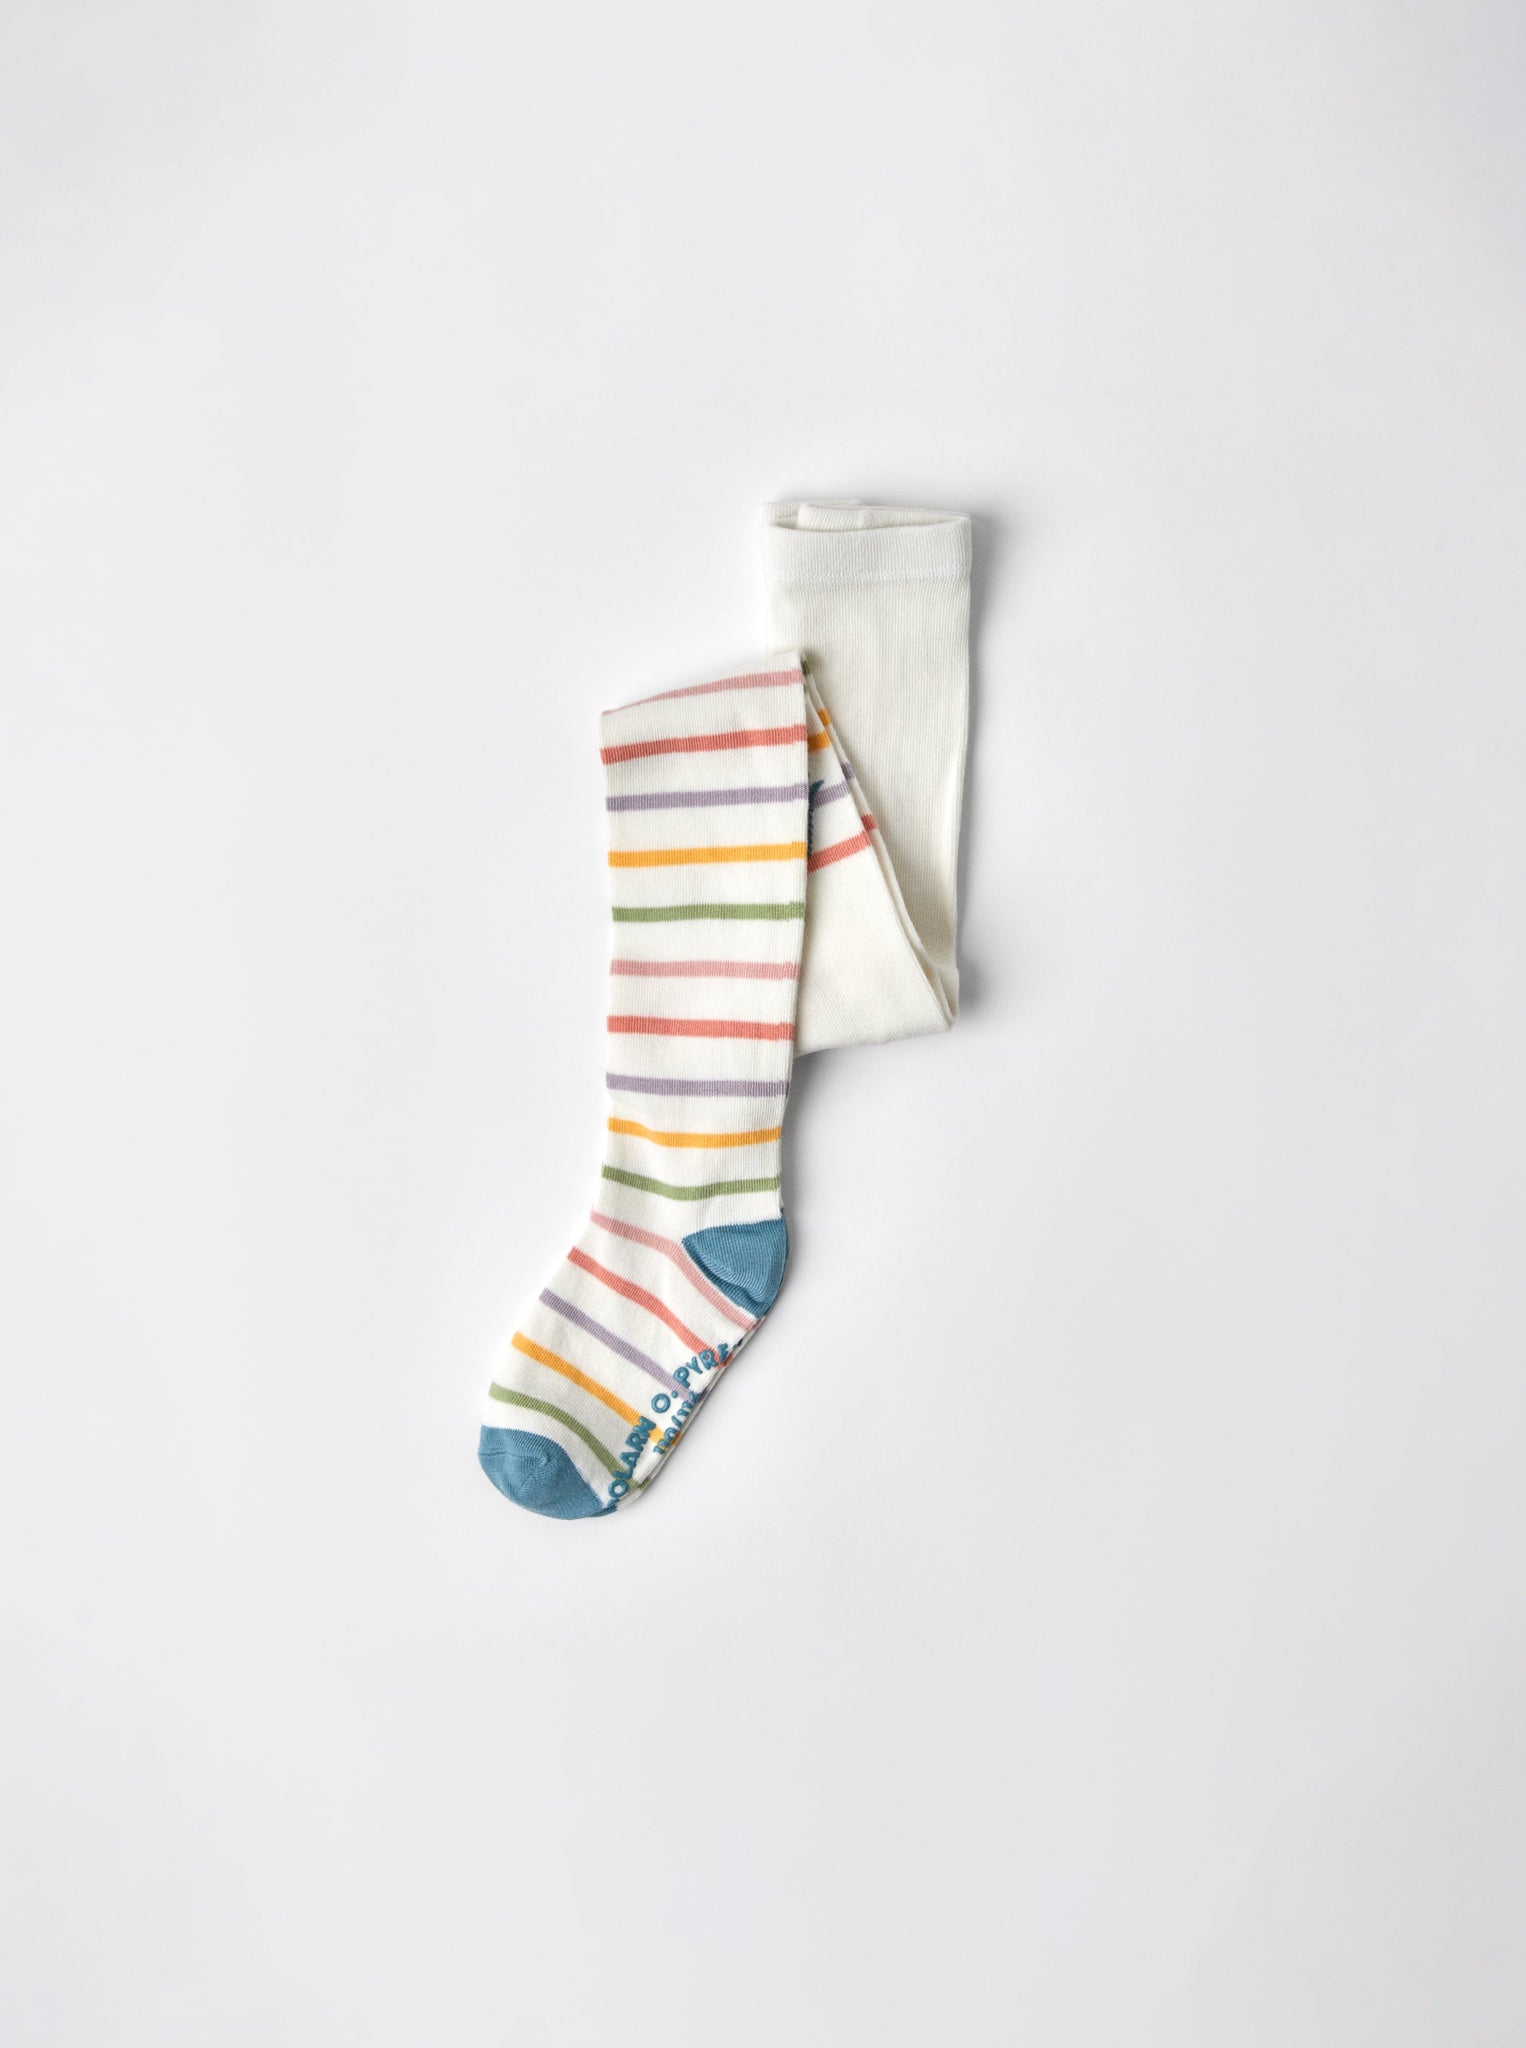 Organic Cotton Stripey Kids Tights from the Polarn O. Pyret kidswear collection. Clothes made using sustainably sourced materials.